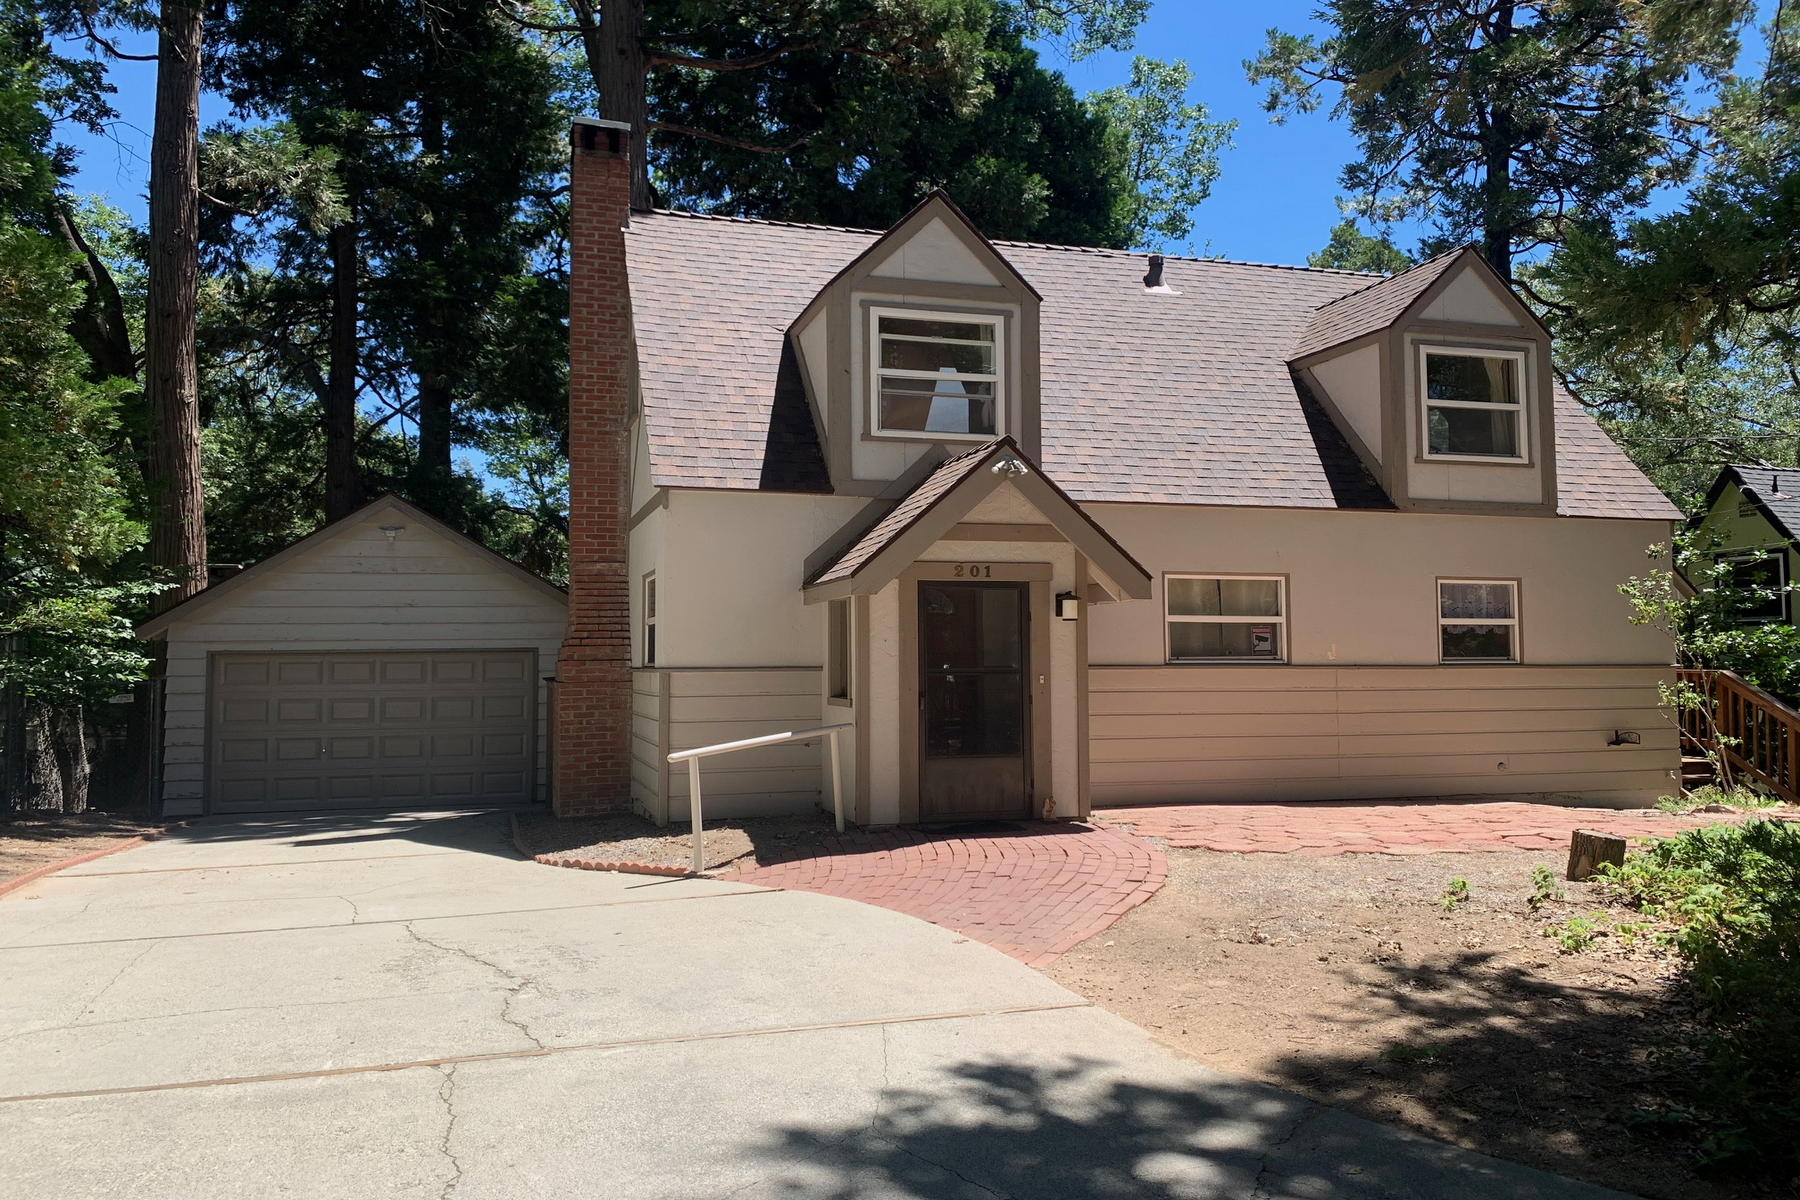 Single Family Homes for Sale at 201 Hemlock Drive, Lake Arrowhead, CA 92352 201 Hemlock Drive Lake Arrowhead, California 92352 United States